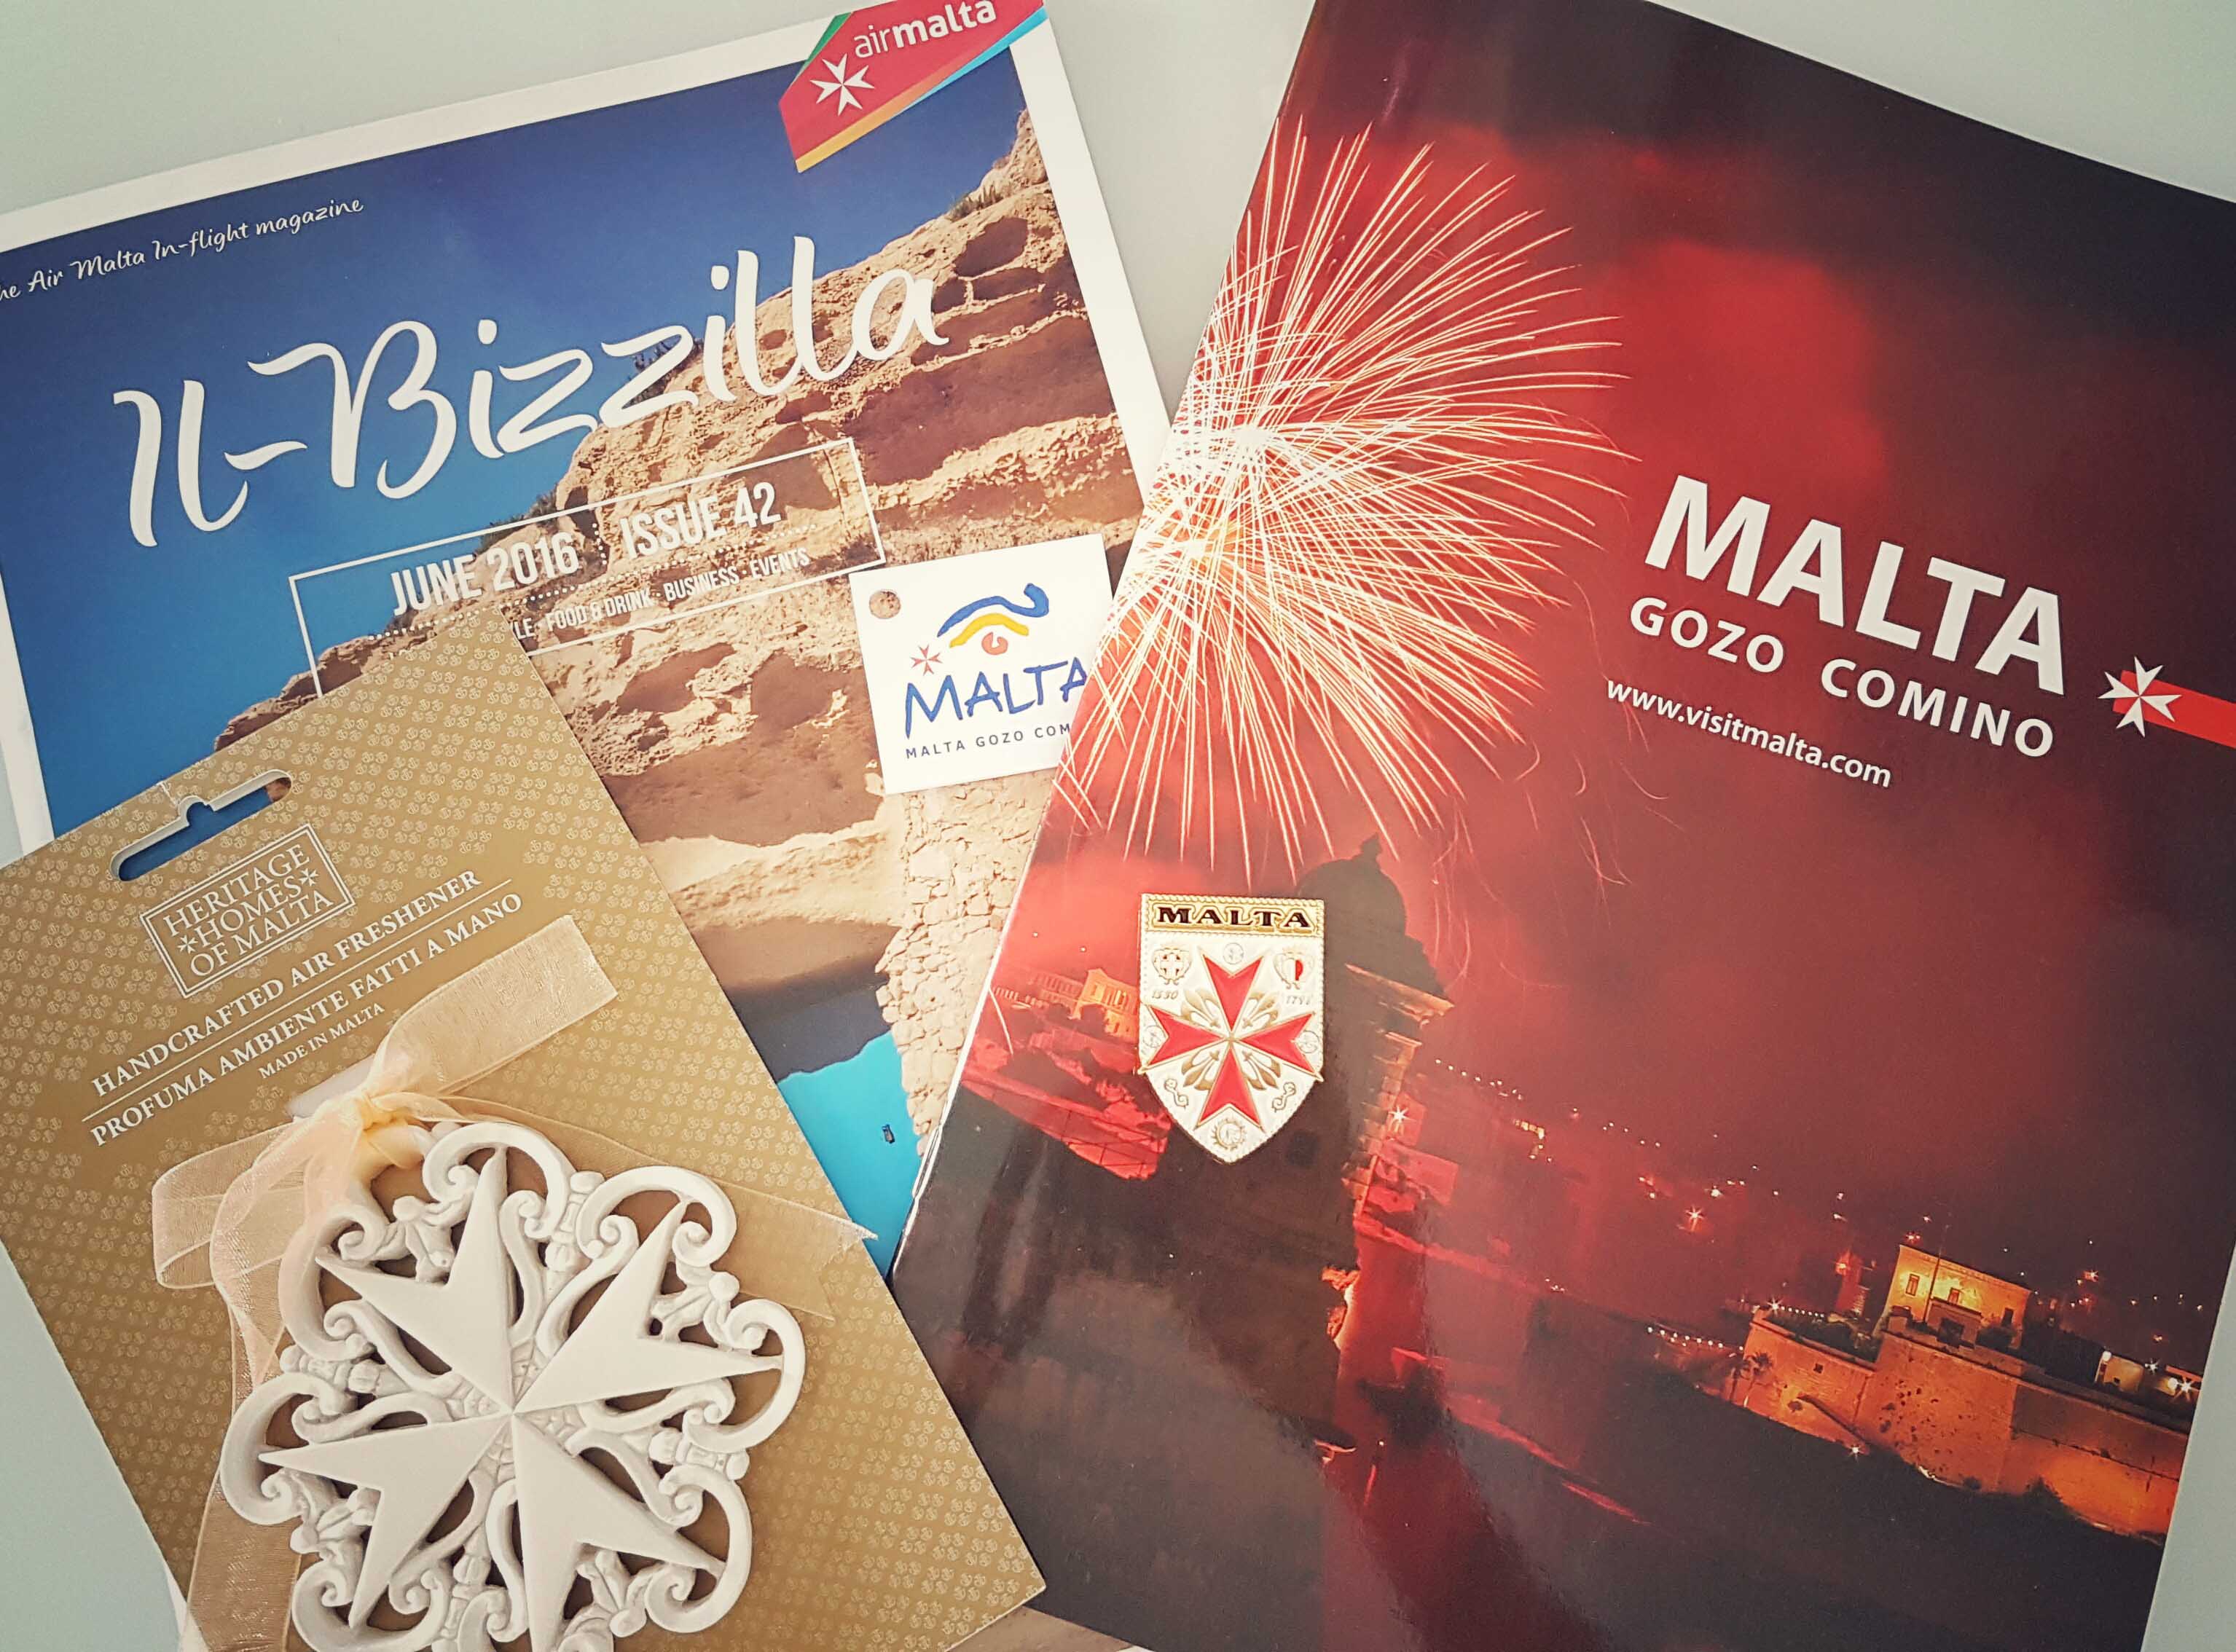 Magnets, bric-a-brac, keychains, magazines ... Malta Cross for all sides!